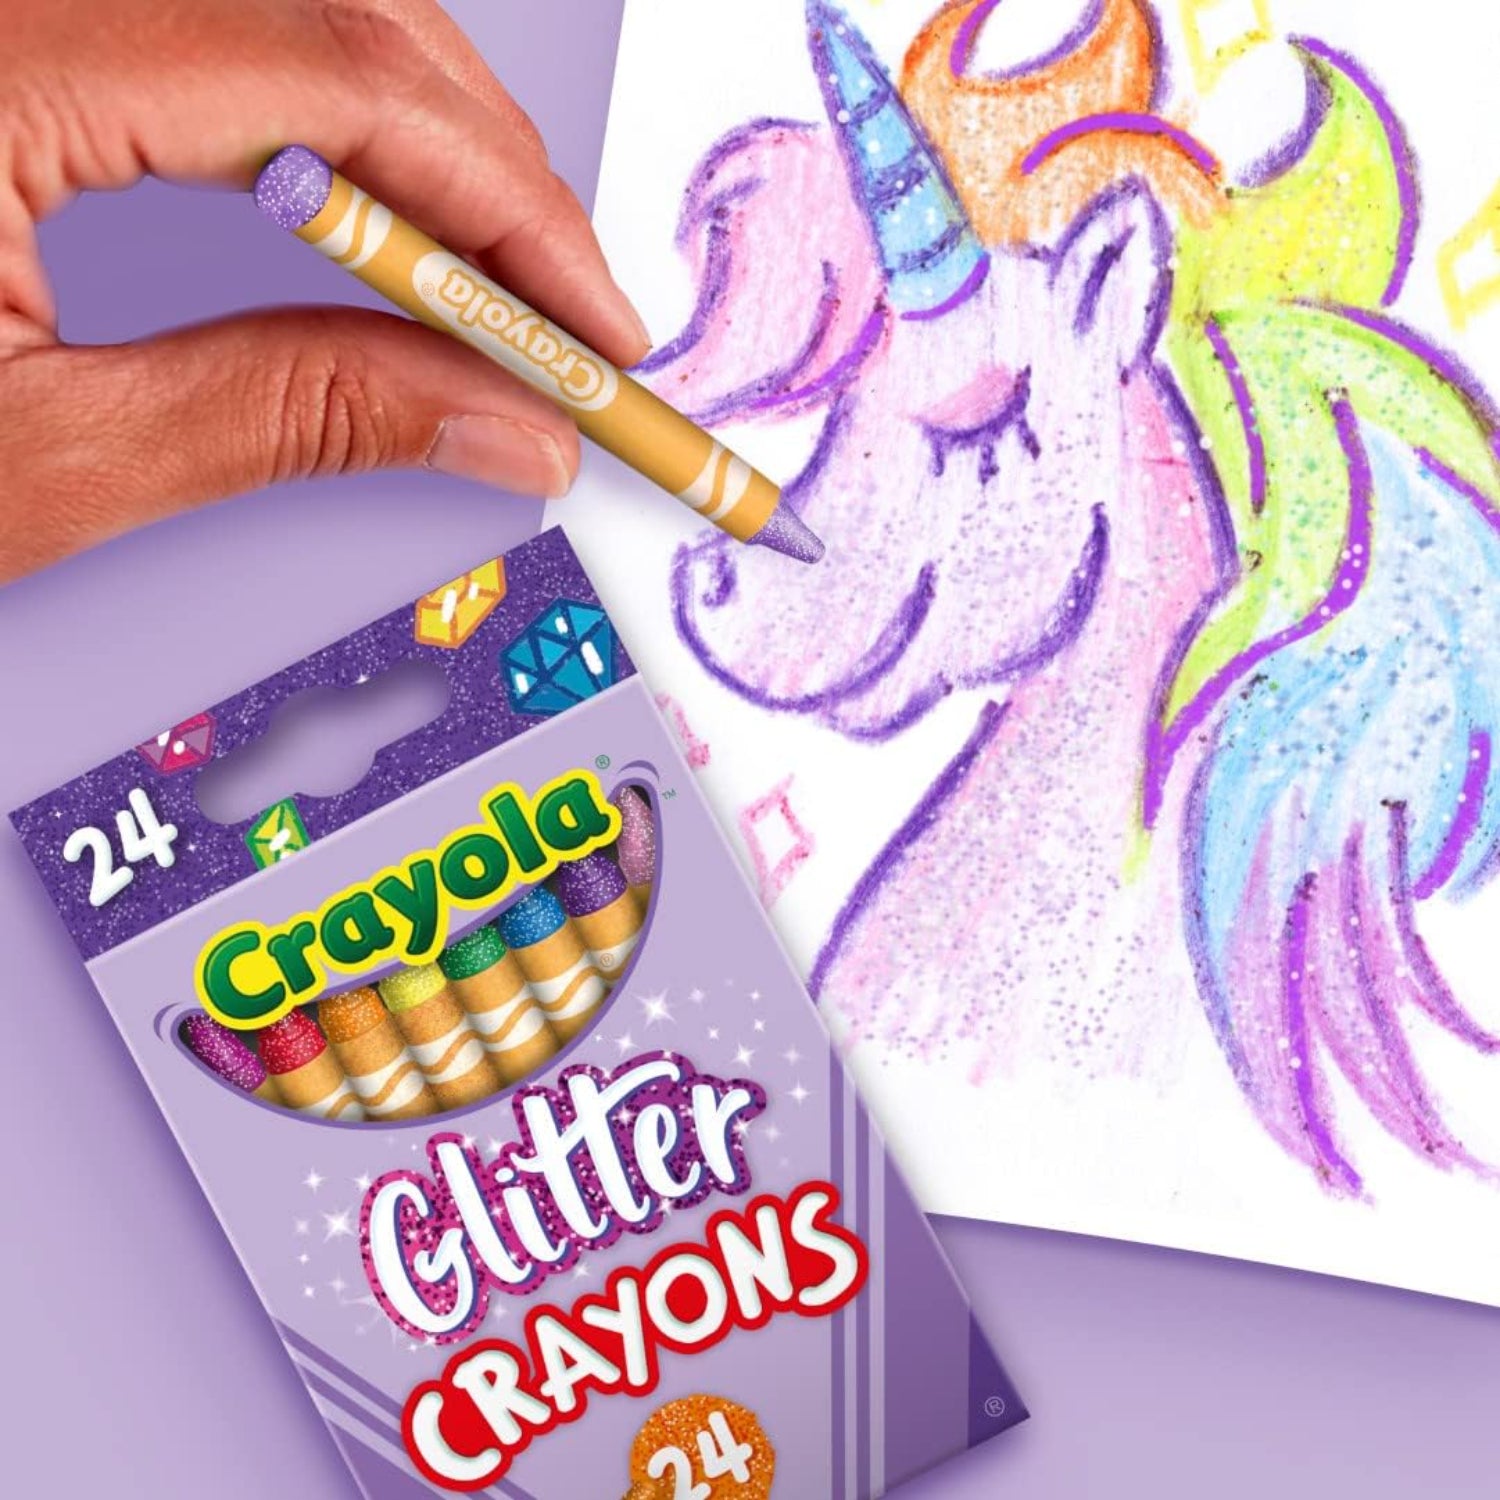 Crayola - Add glimmer effects to both light and dark paper with